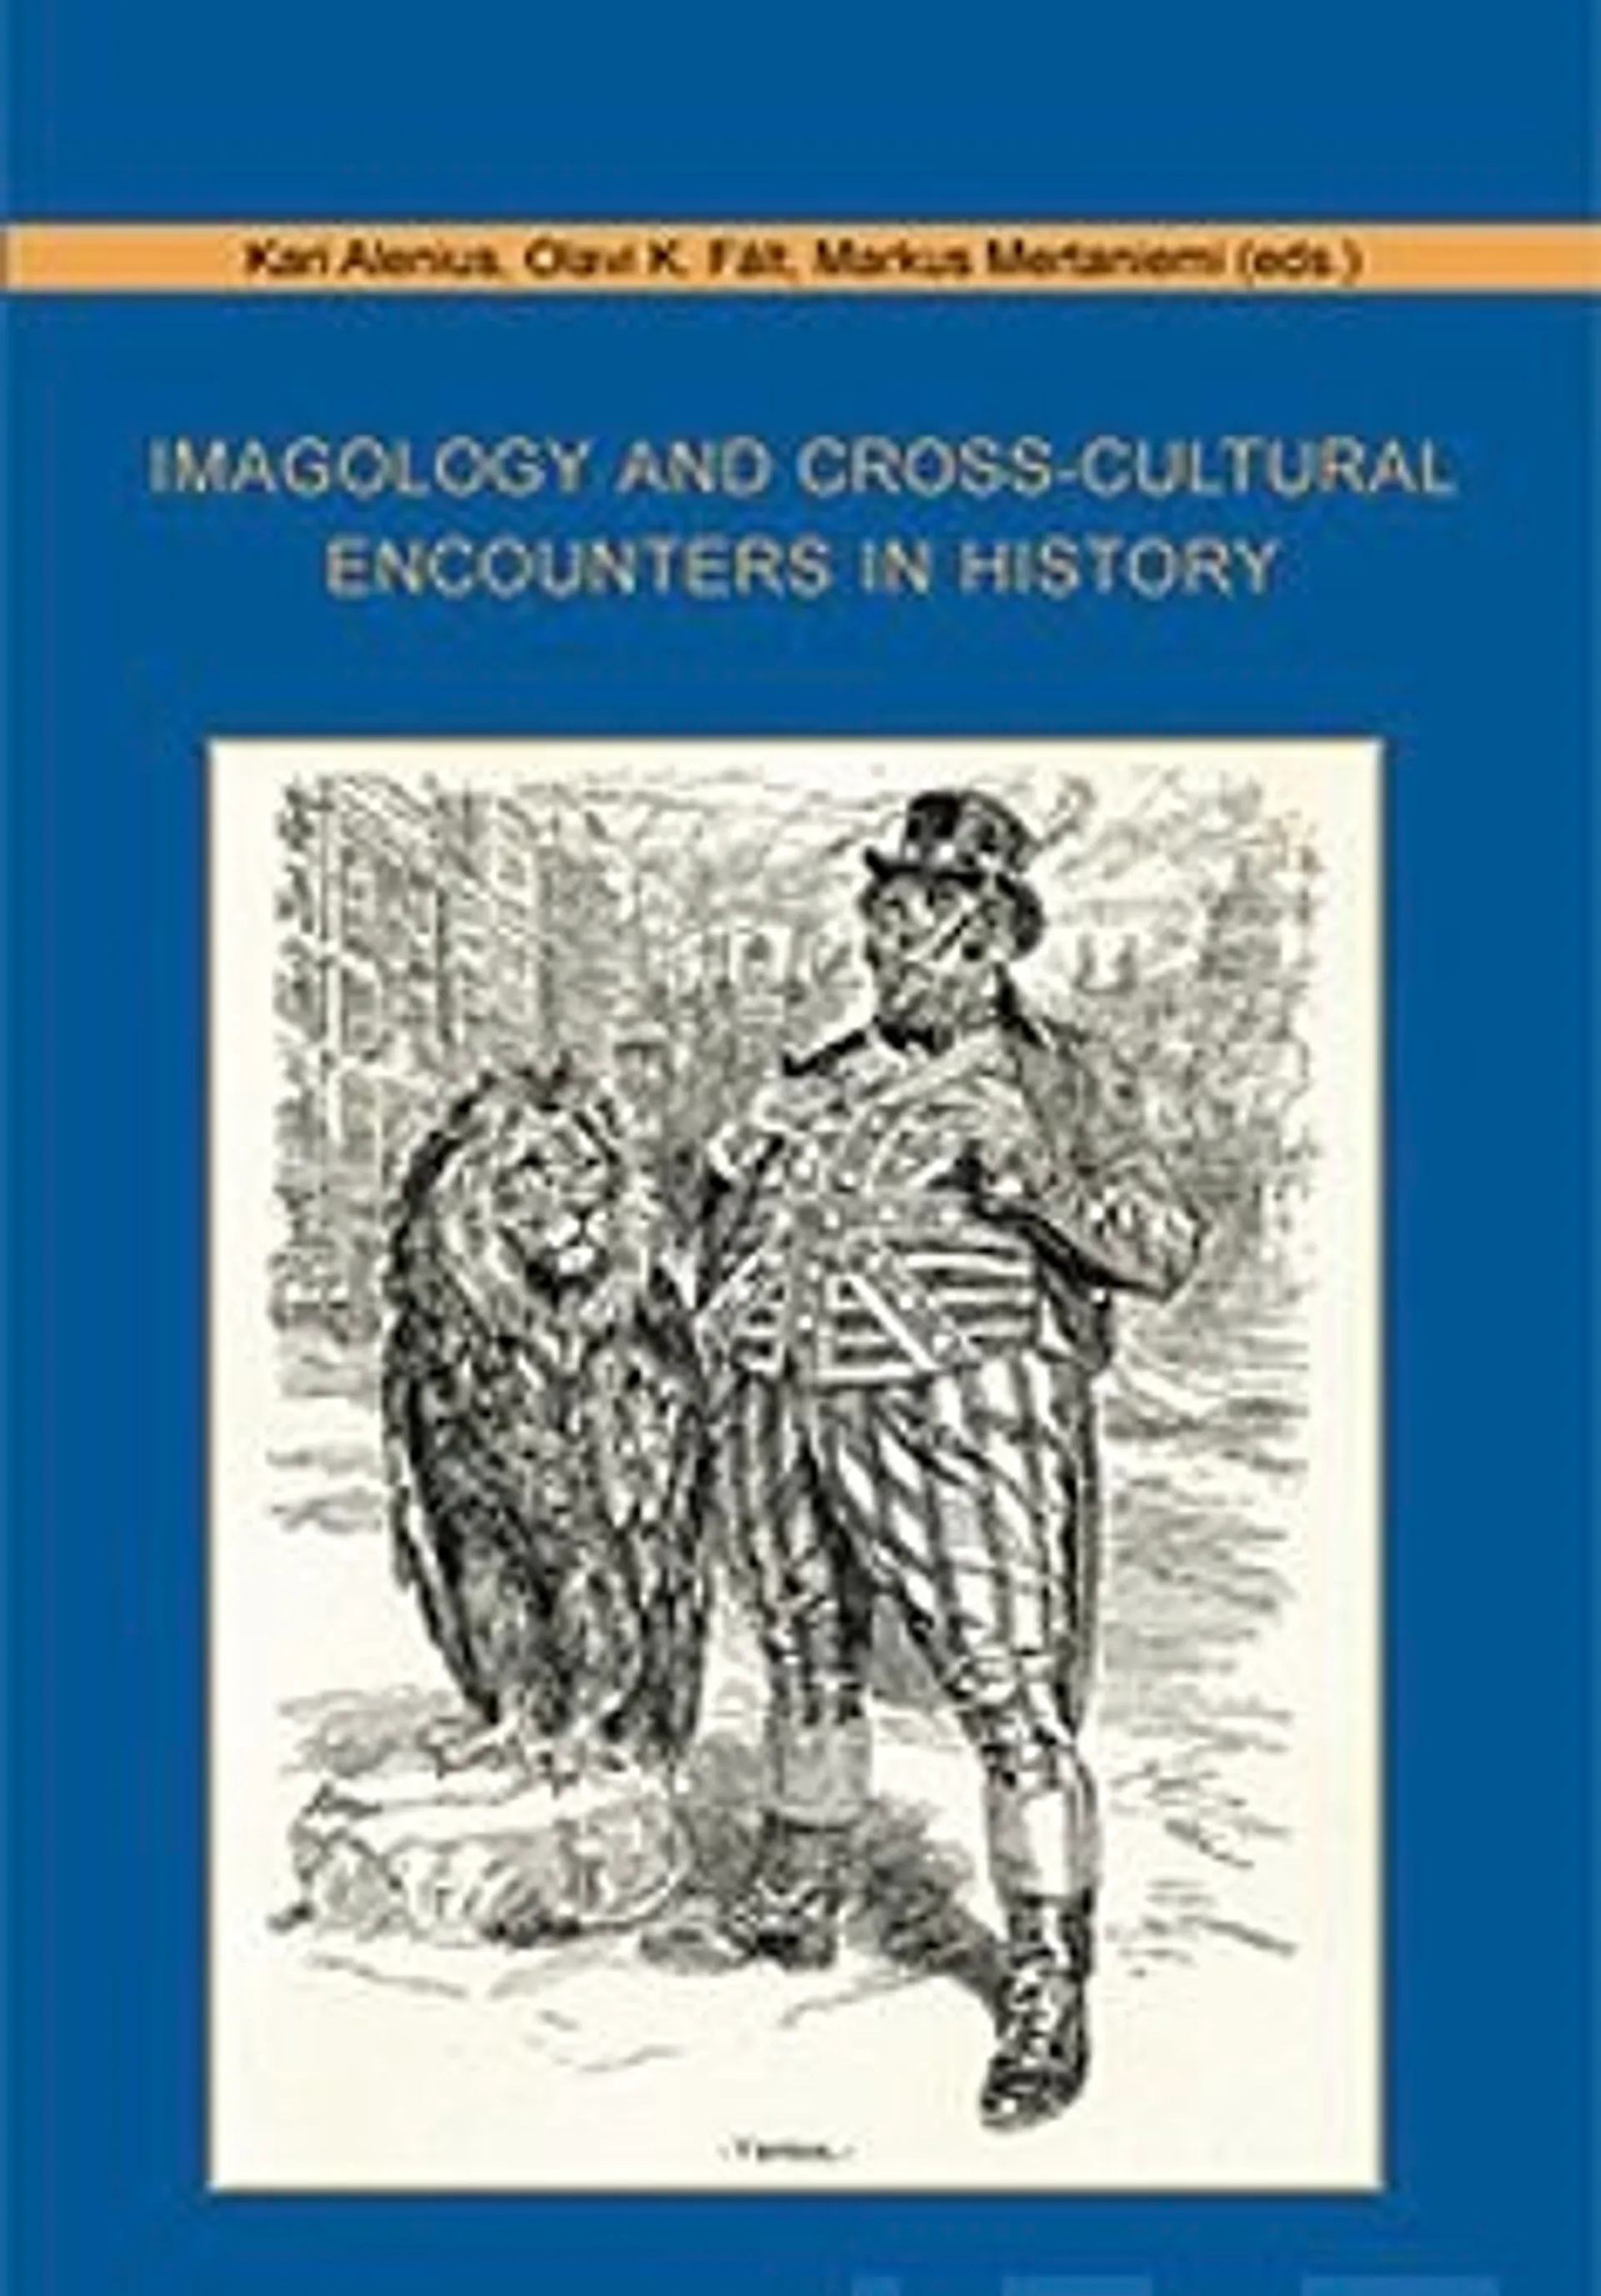 Imagology and cross-cultural encounters in history